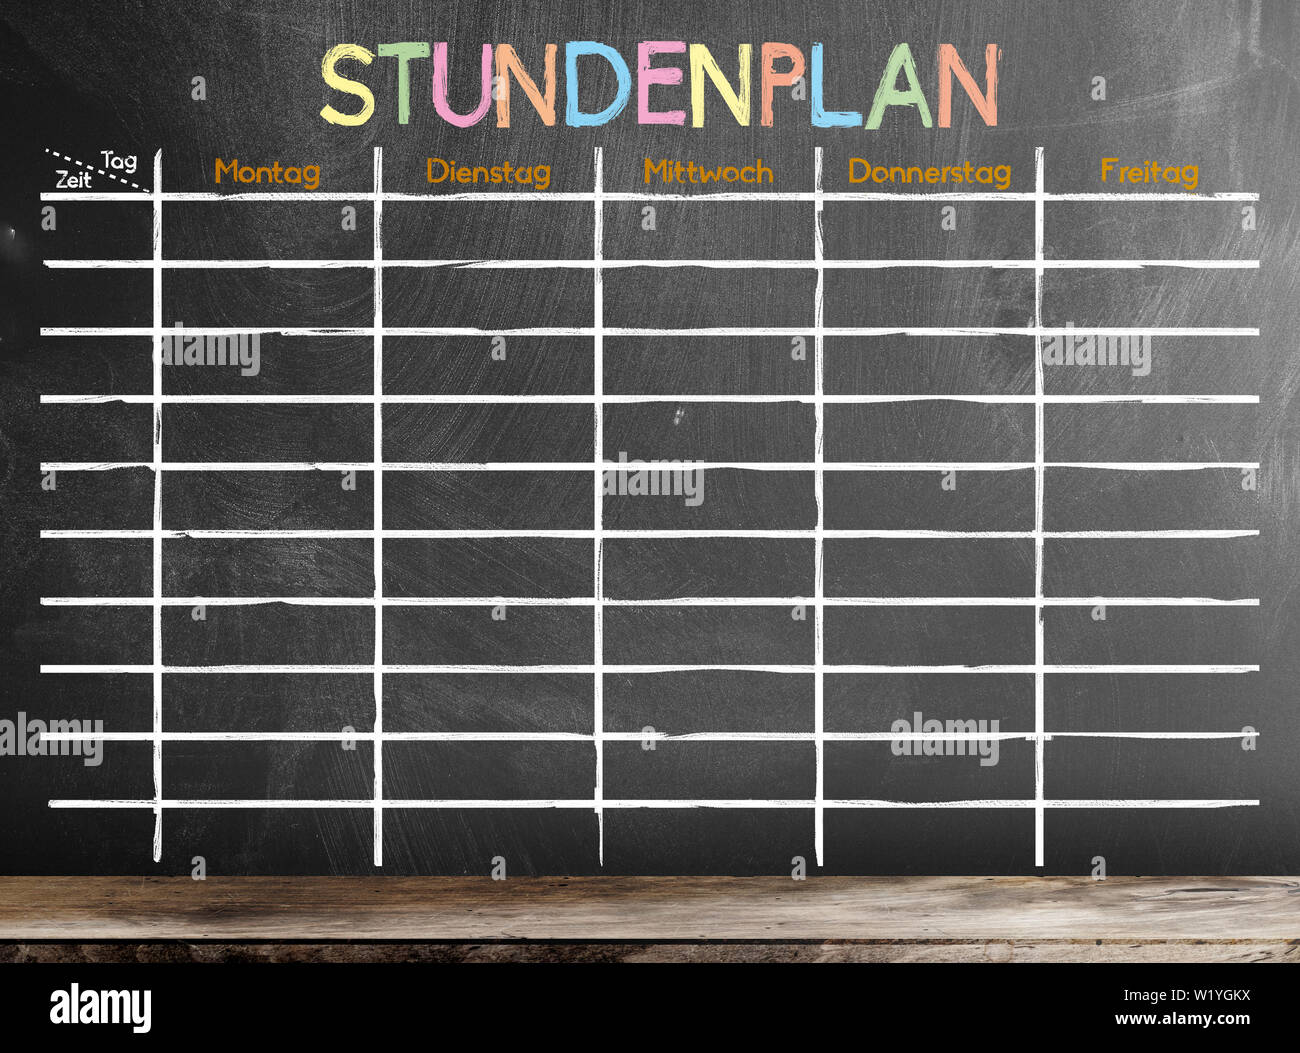 school timetable or class schedule with German word STUNDENPLAN template on blackboard Stock Photo